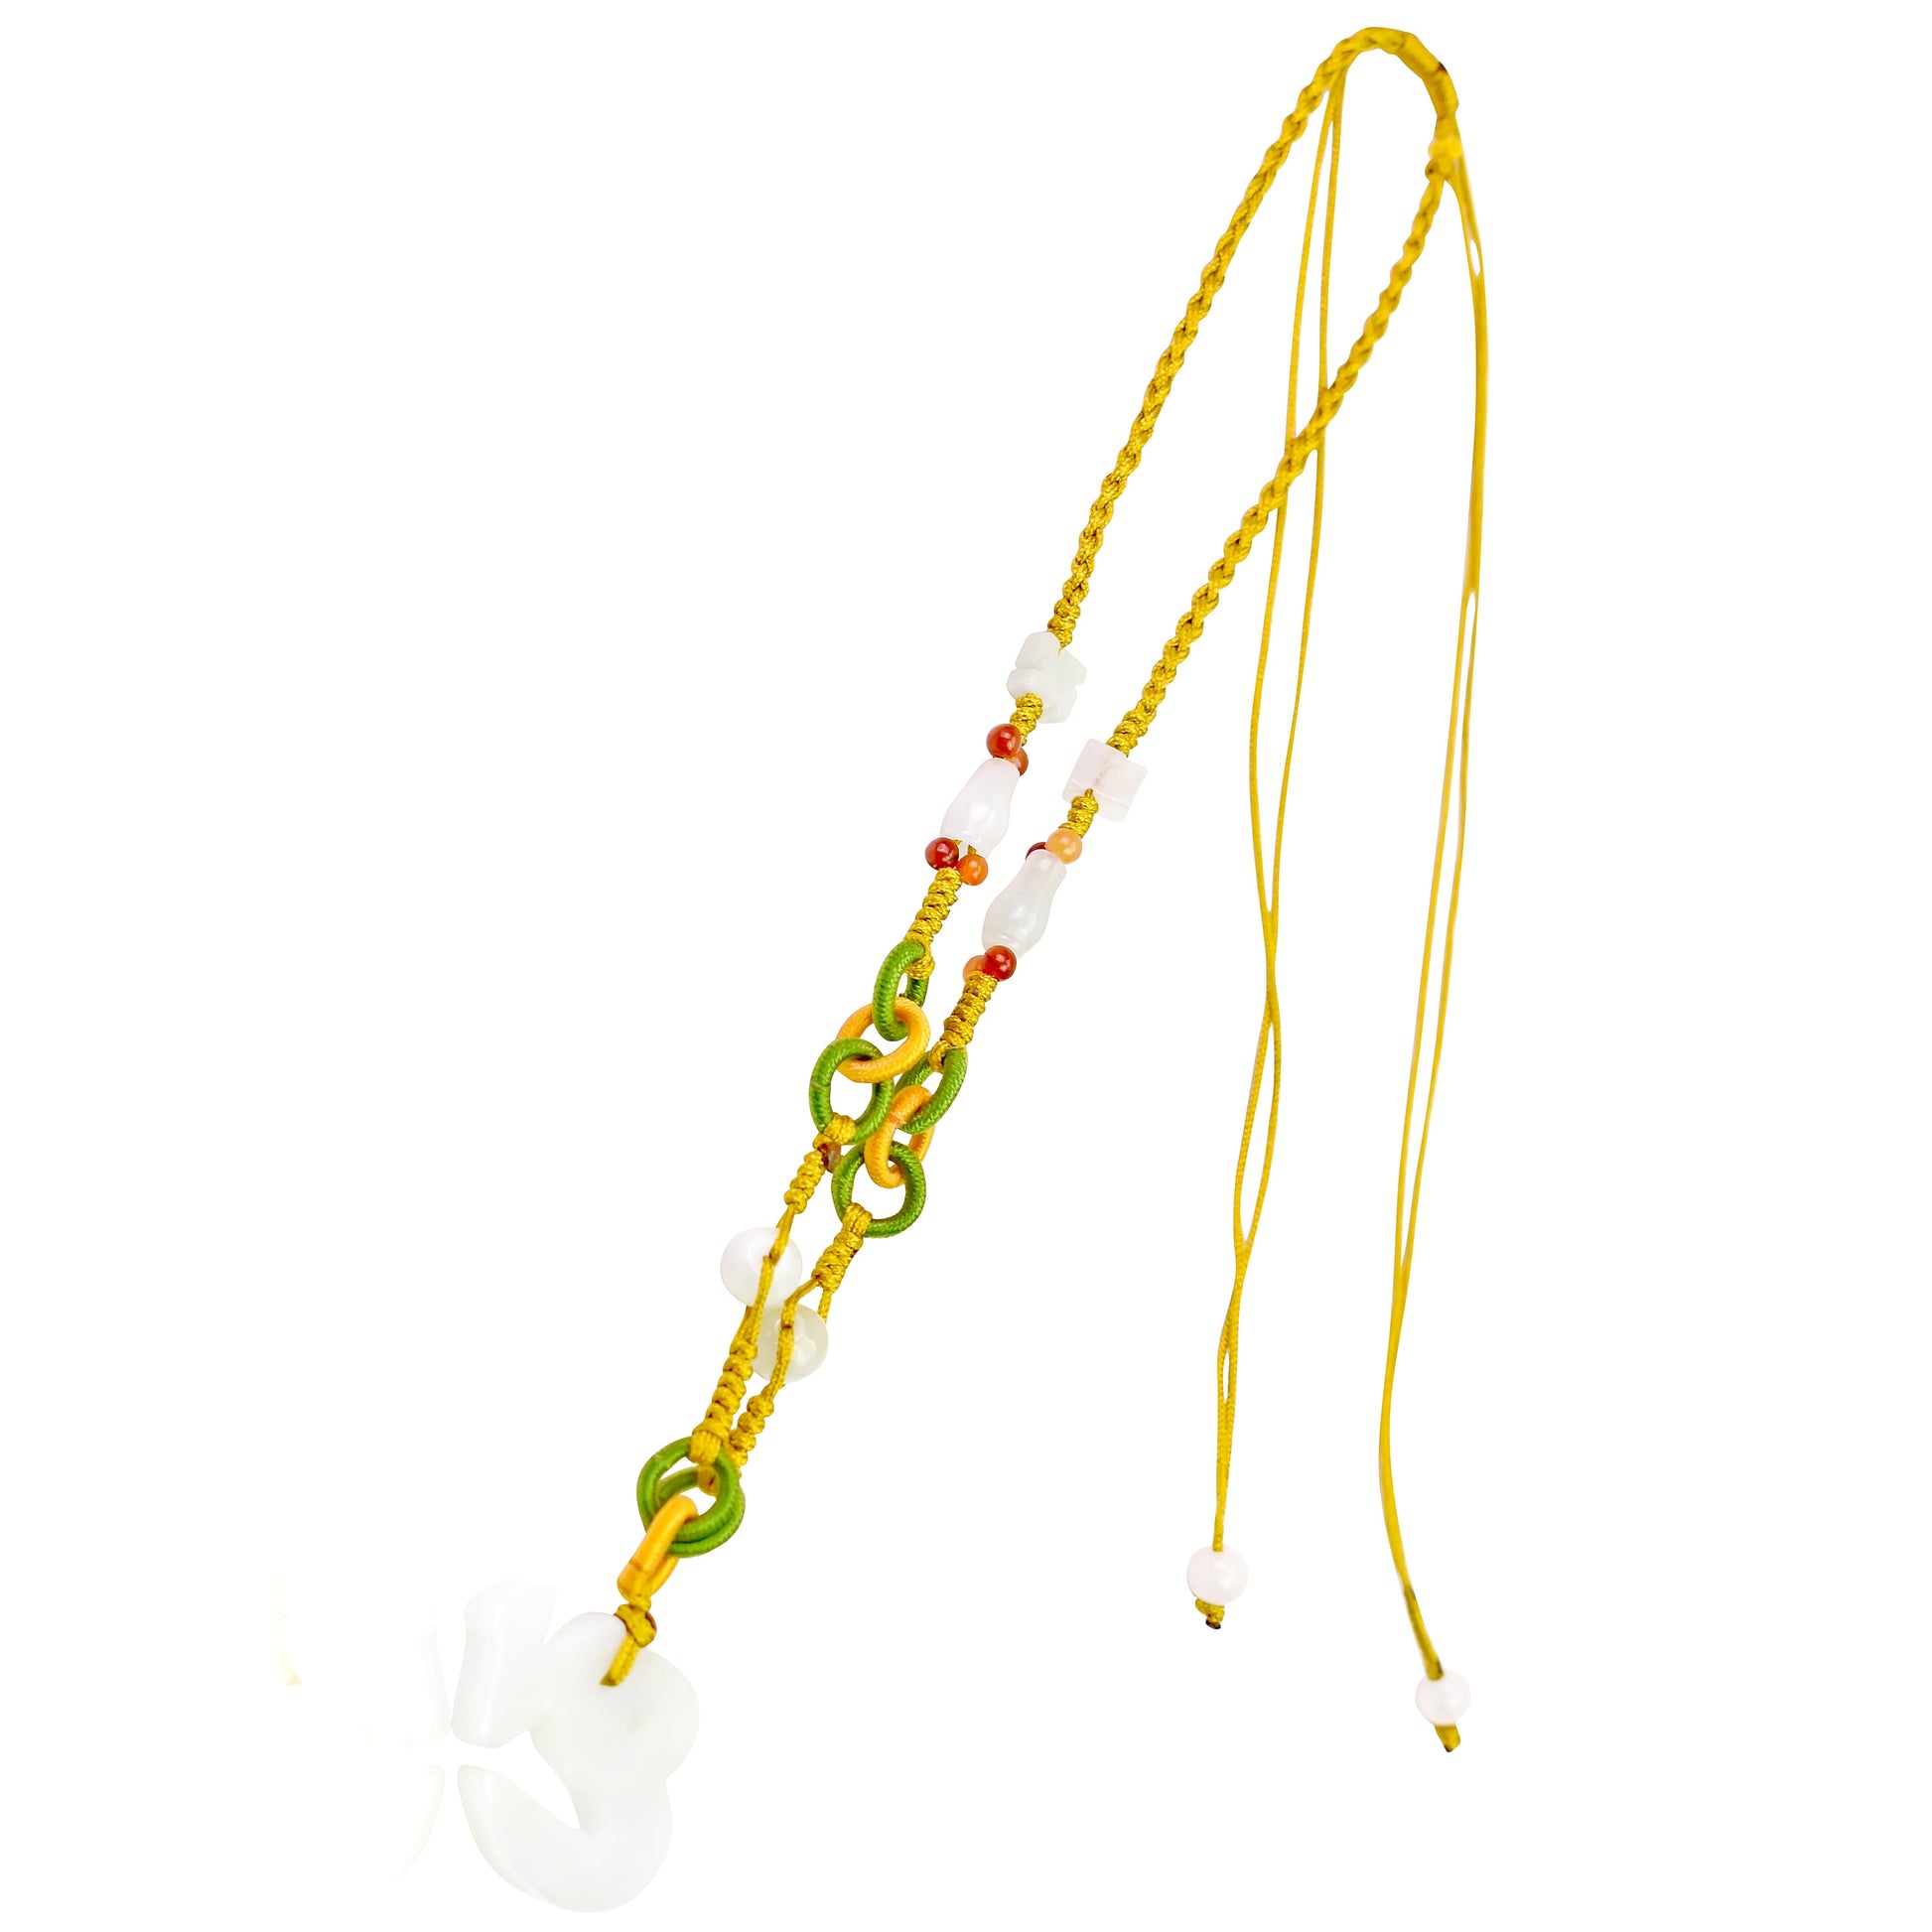 Feel the Love and Passion with a Capricorn Handmade Jade Pendant made with Yellow Cord